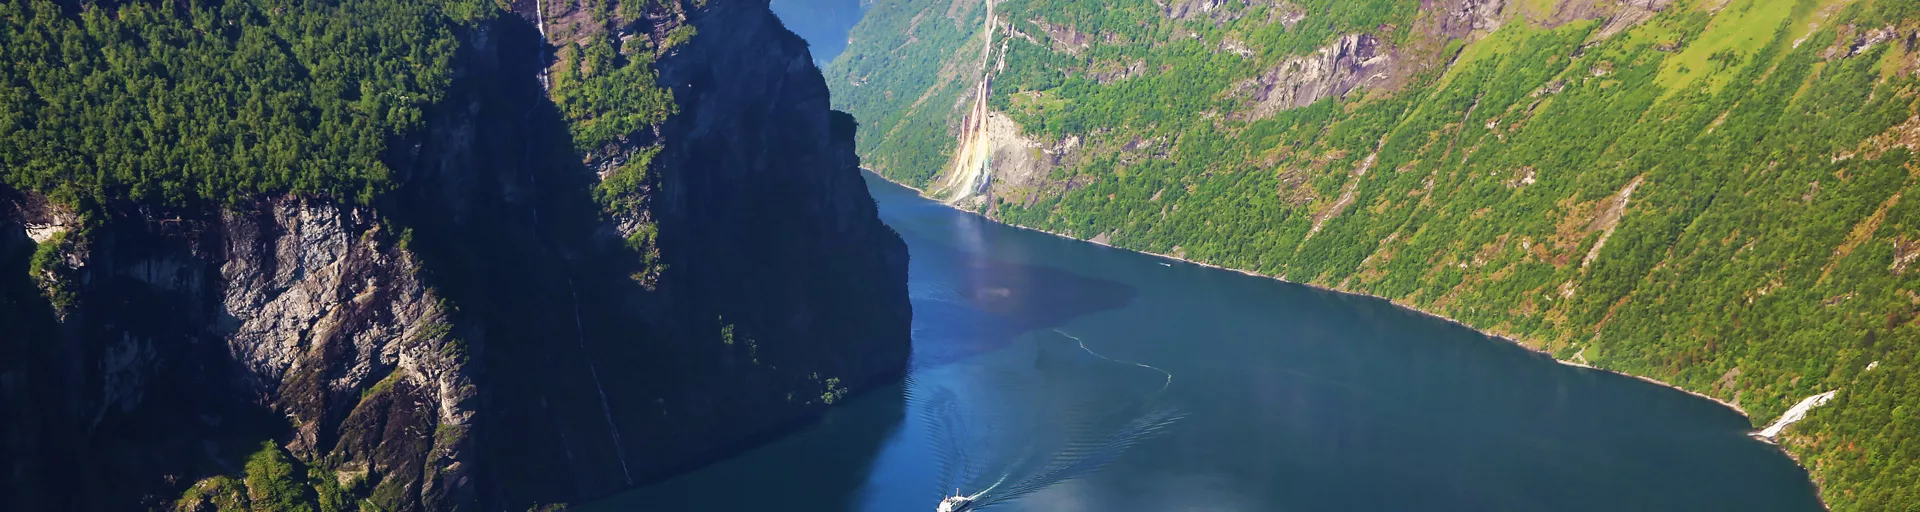 Norway Luxury Tours and Travel Guide